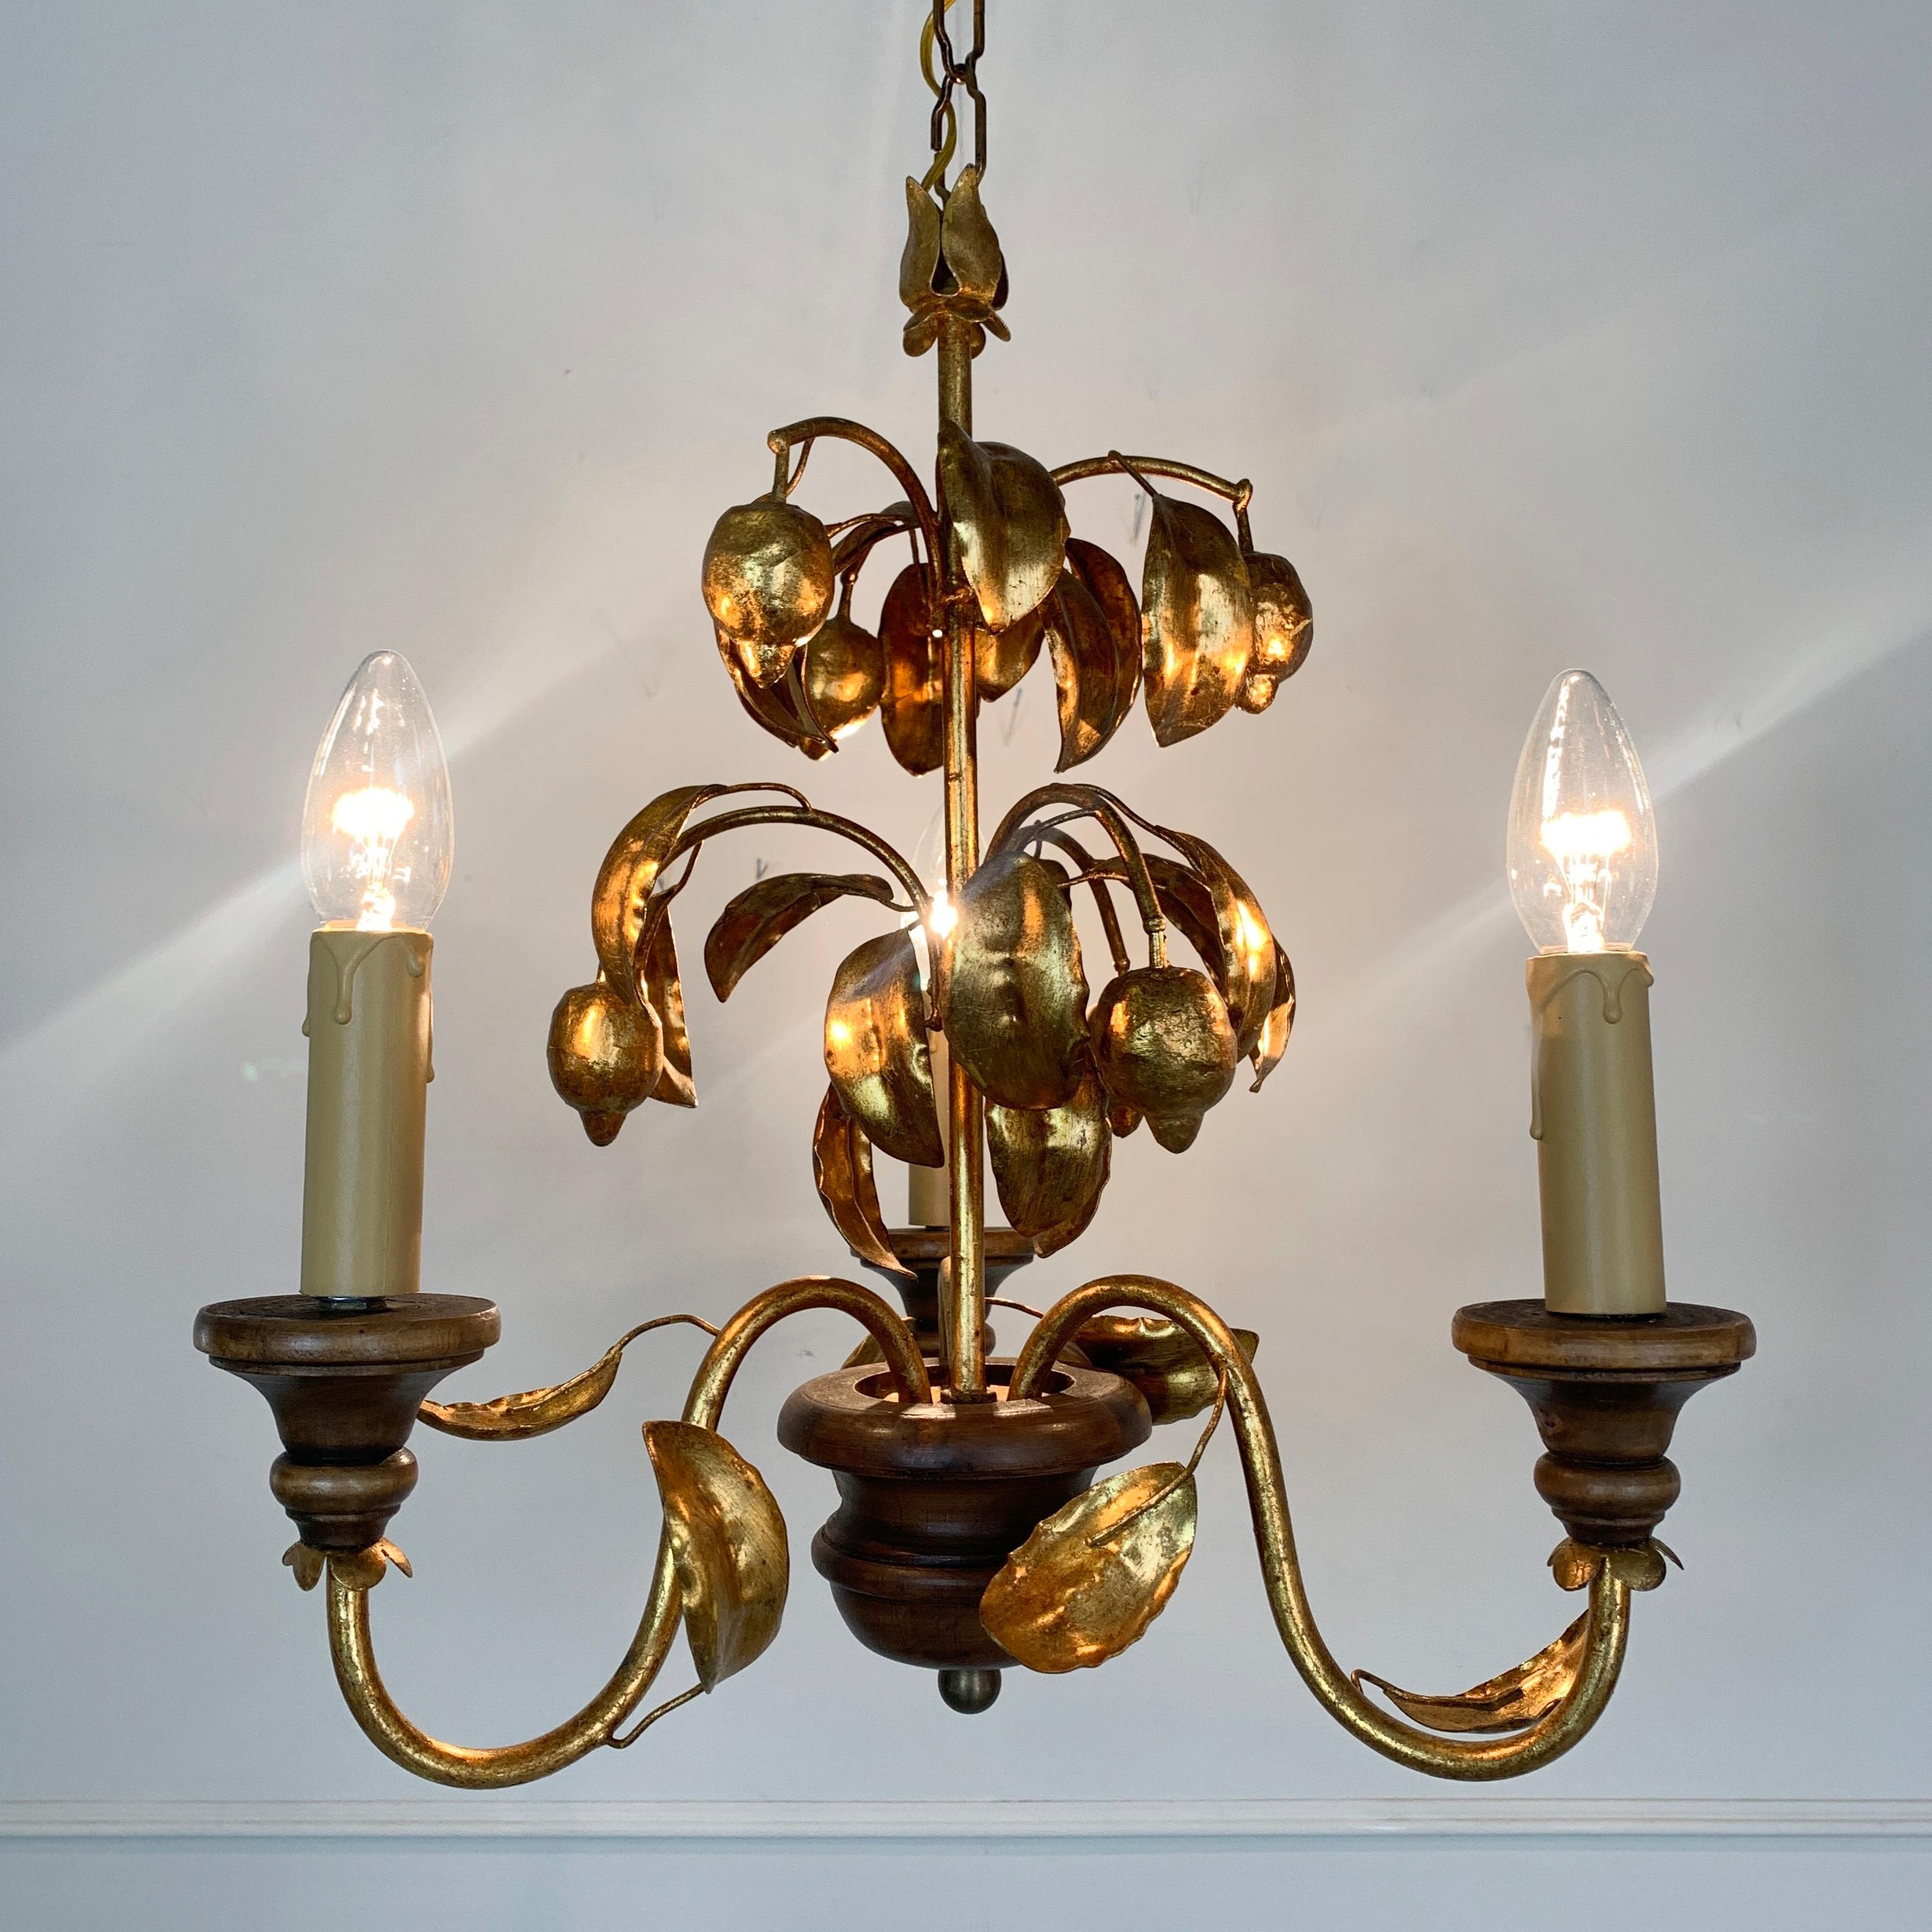 Gilt lemons and leaves toleware chandelier
circa 1970s, France
Fabulous bright original gold leaf finish
3-arm chandelier with turned wooden finial and lamp holder cups
Measures: 70cm total height, 37cm width, 13cm ceiling rose width
 
The light is